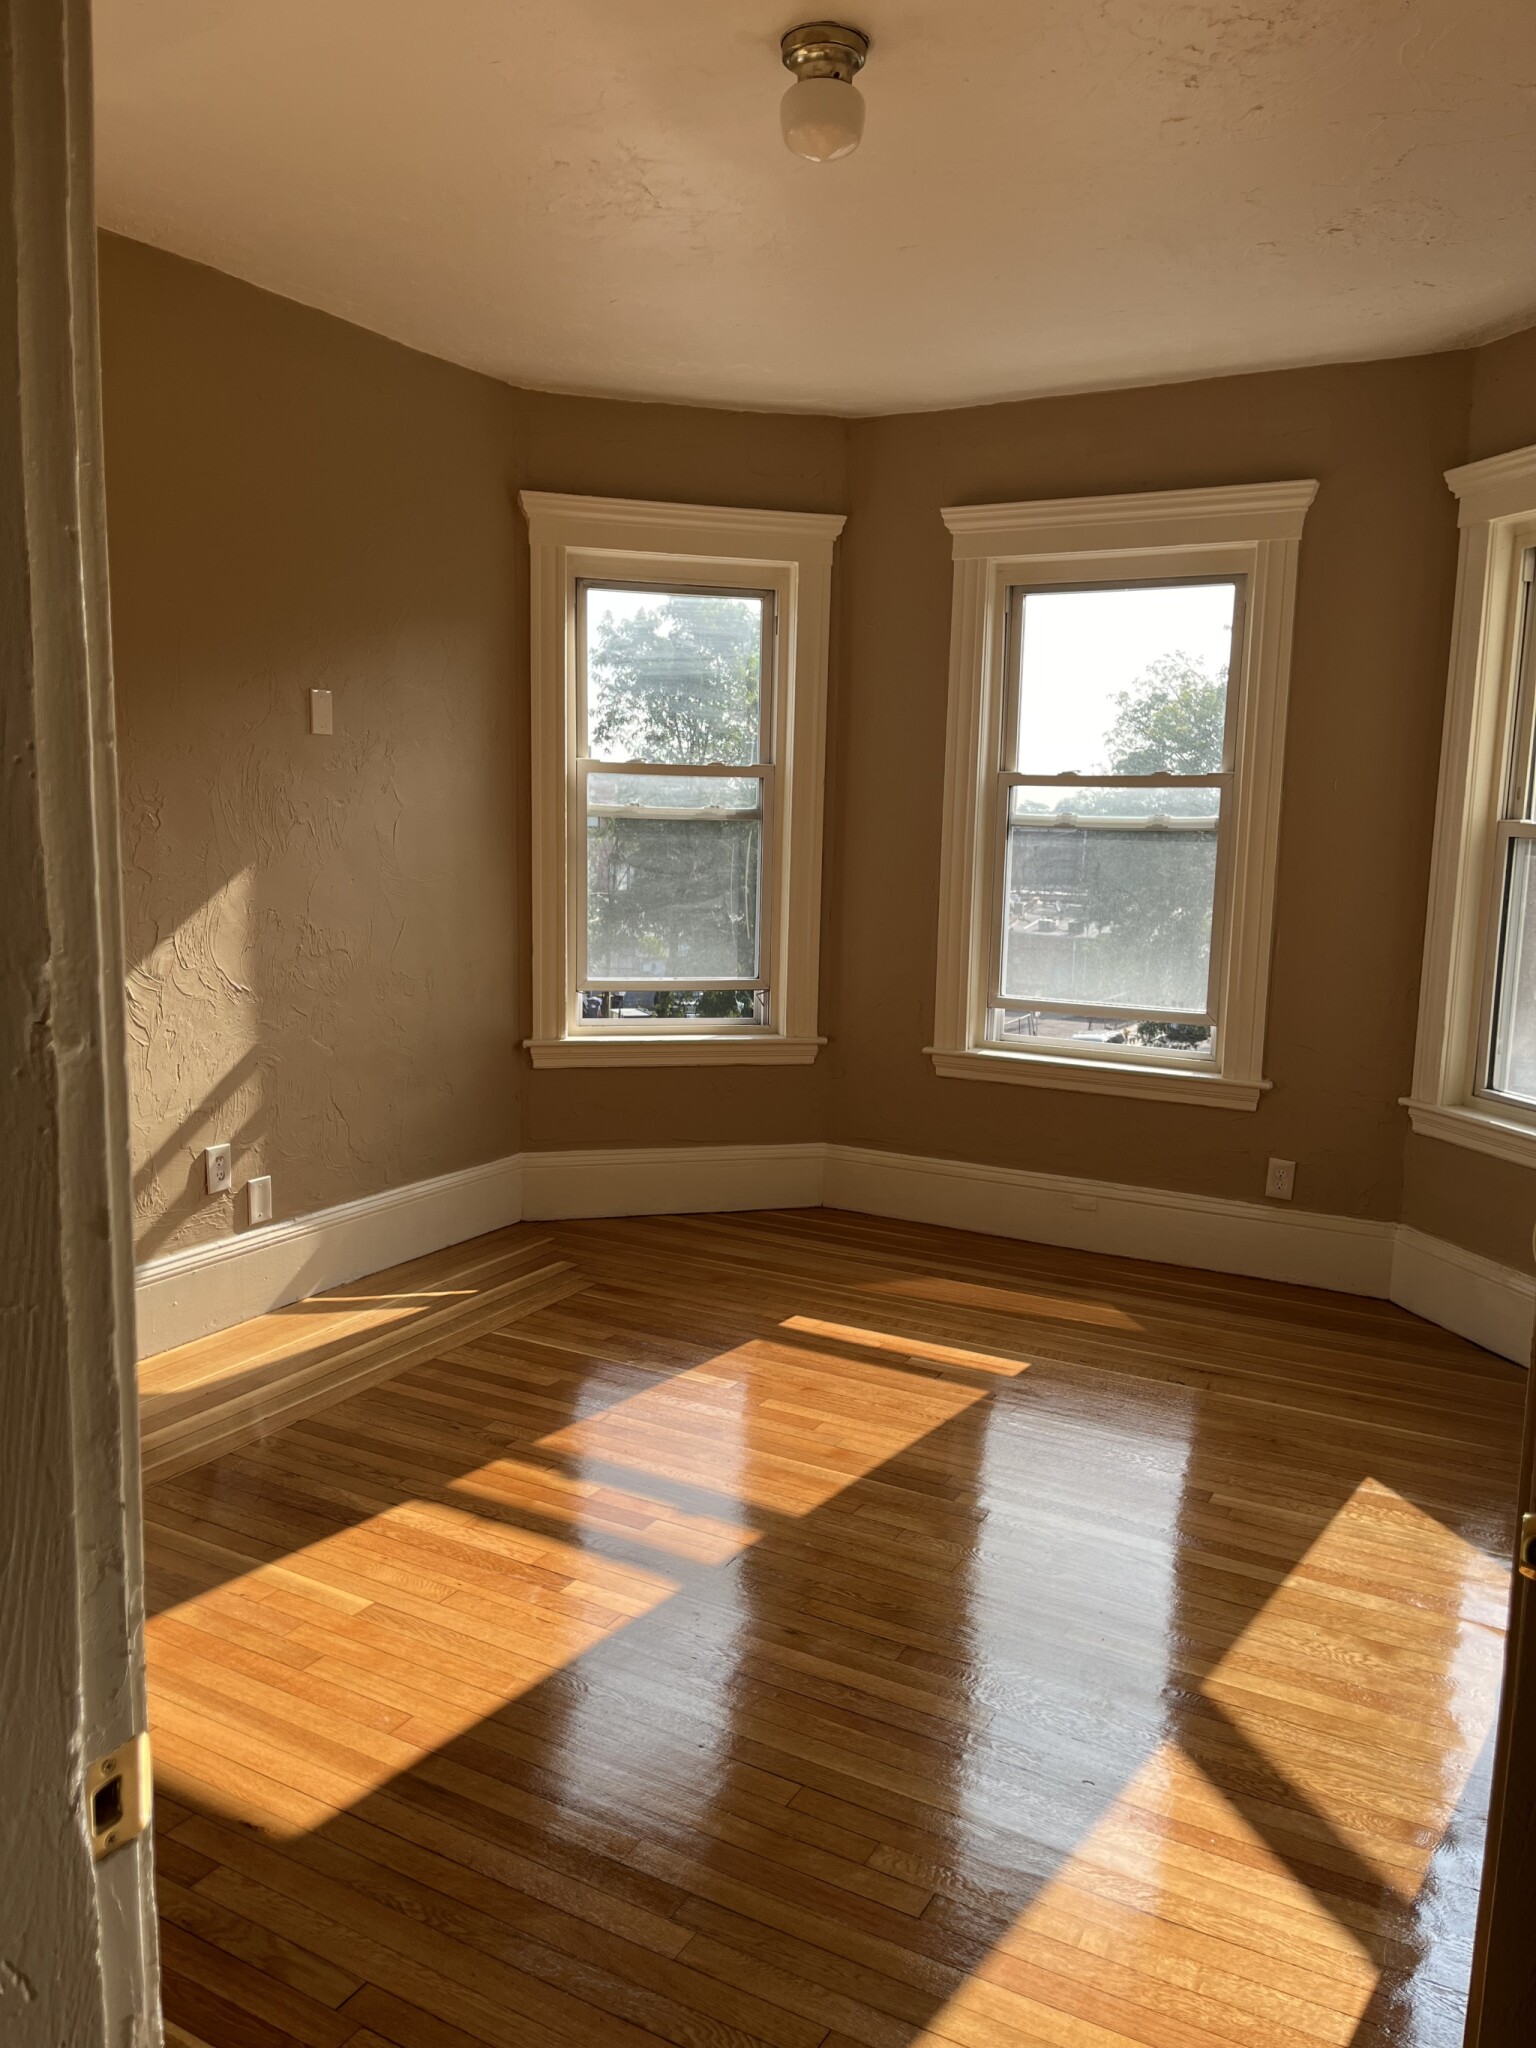 Photos of apartment on Waumbeck St.,Boston MA 02121